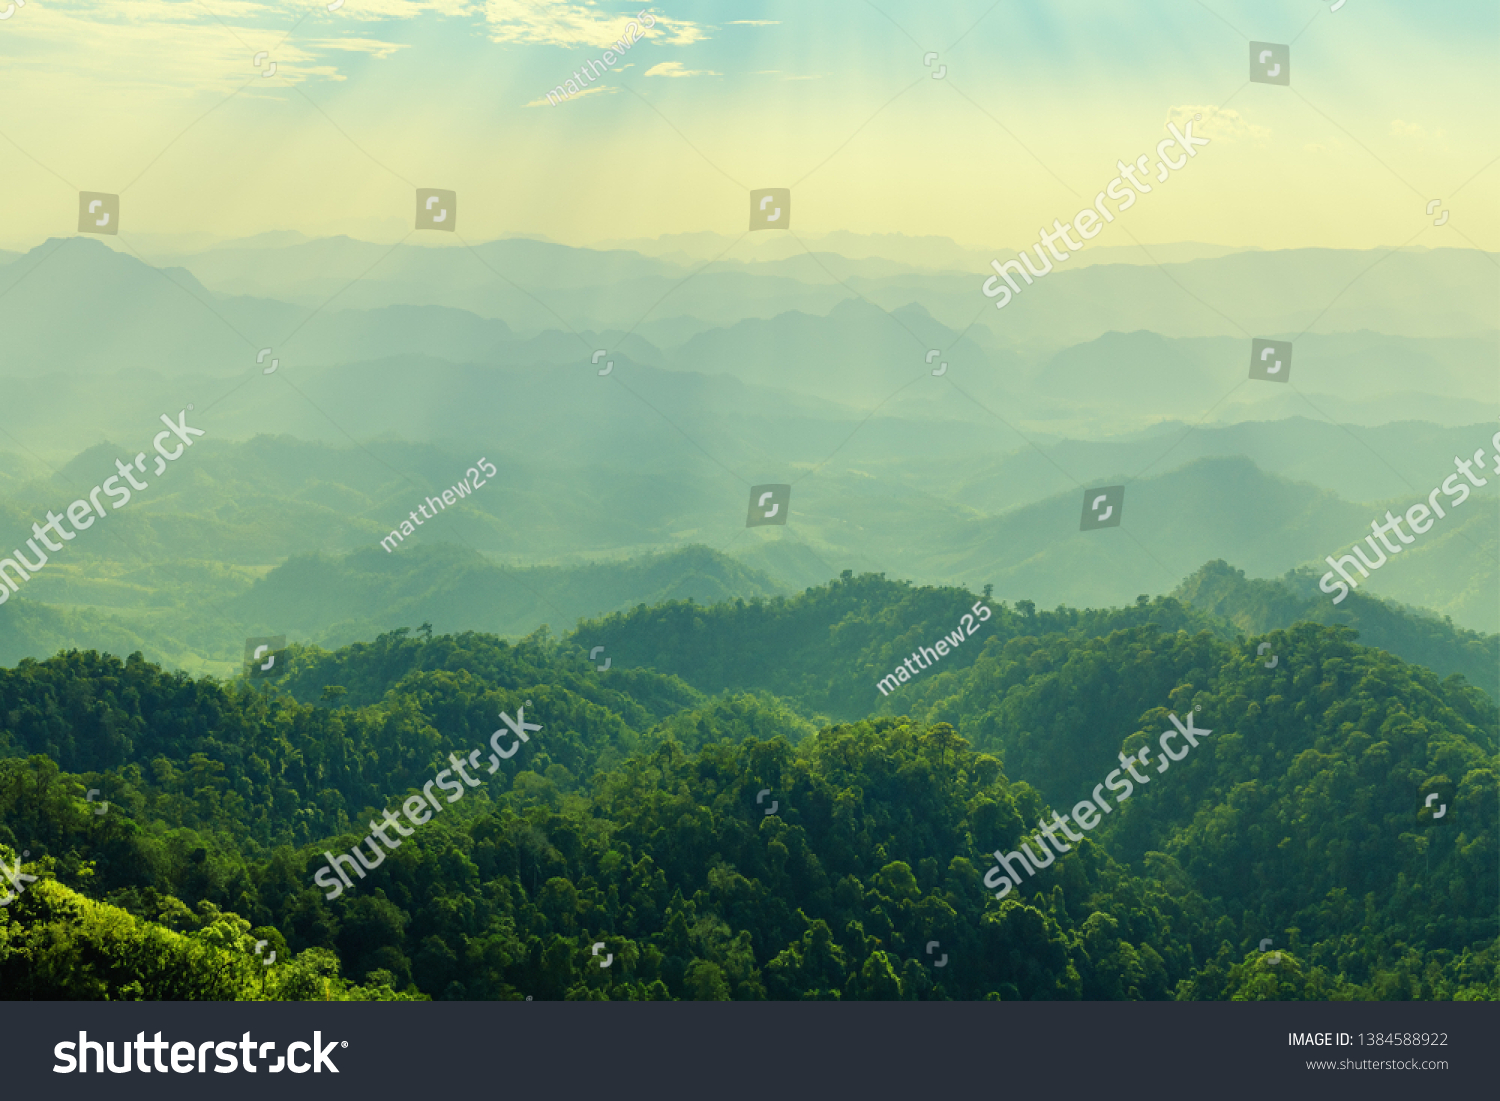 High mountain in morning time. Beautiful natural landscape #1384588922